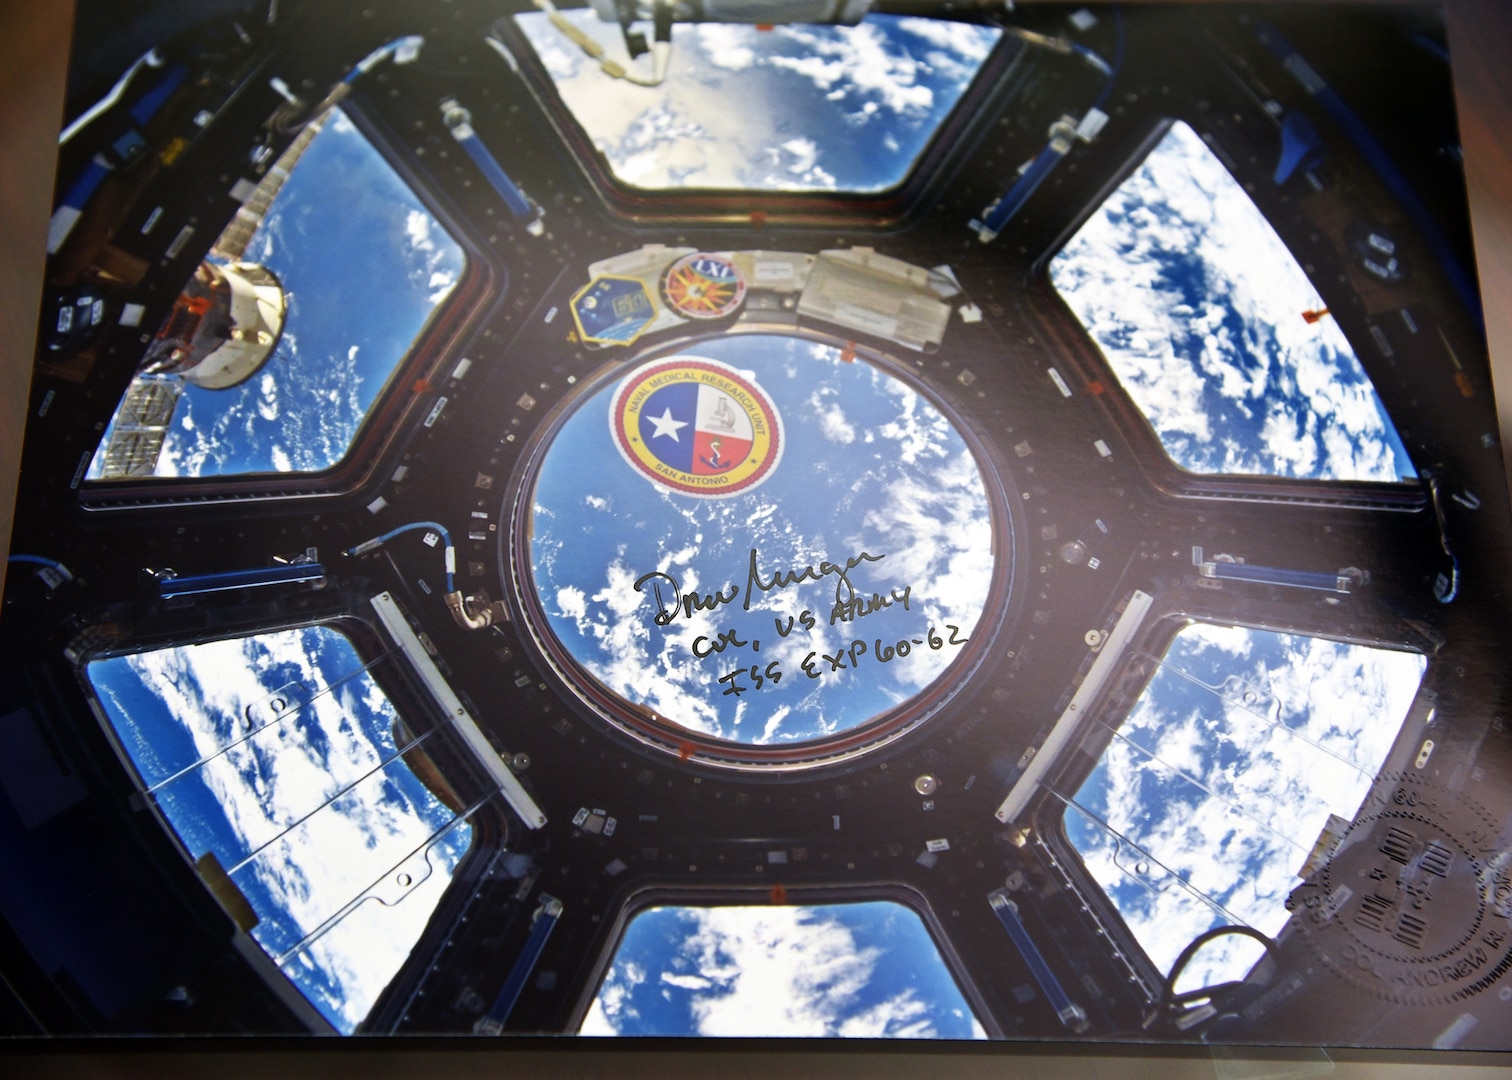 A command coin and logo sticker from Naval Medical Research Unit San Antonio taken aboard the International Space Station